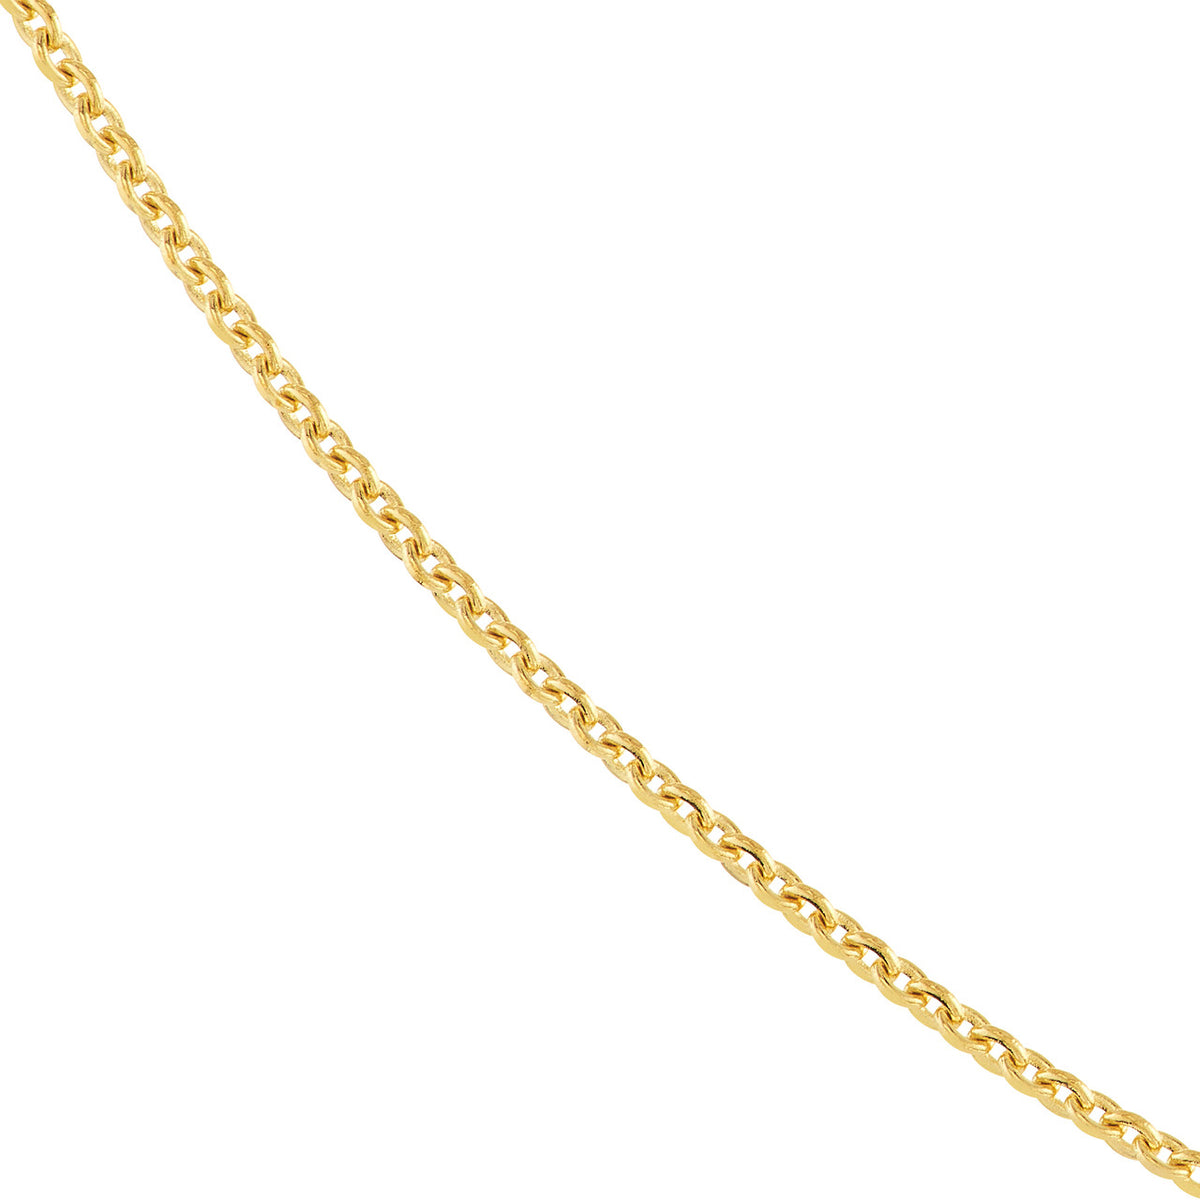 14K Yellow Gold and White Gold 0.9mm Cable Chain Necklace with Spring Ring